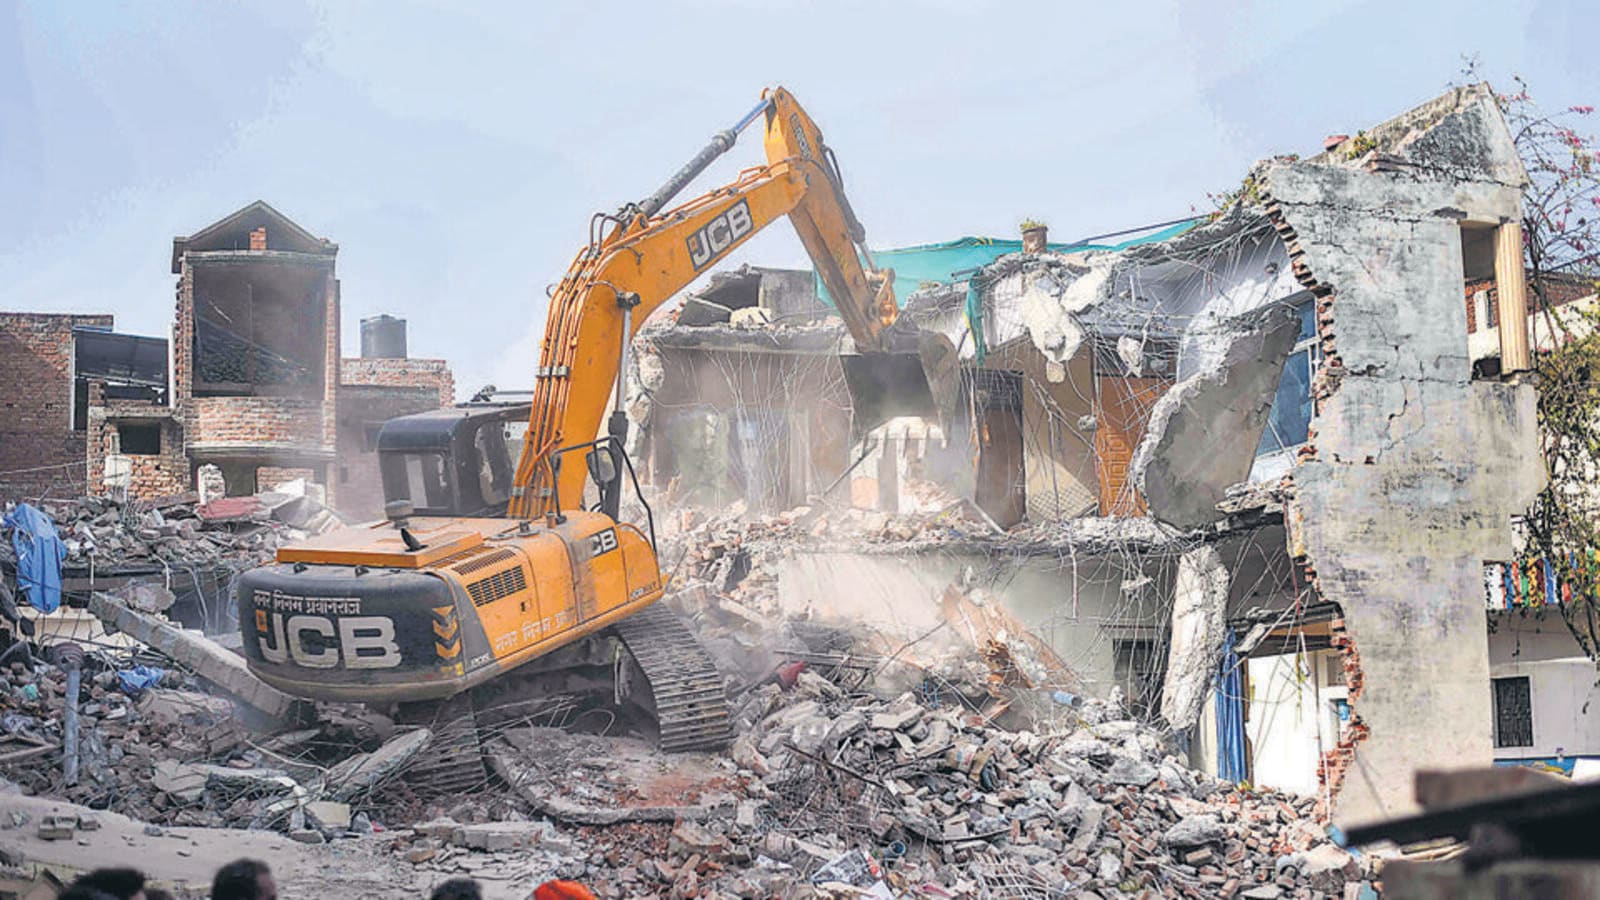 Uproar over bulldozer action in Indore